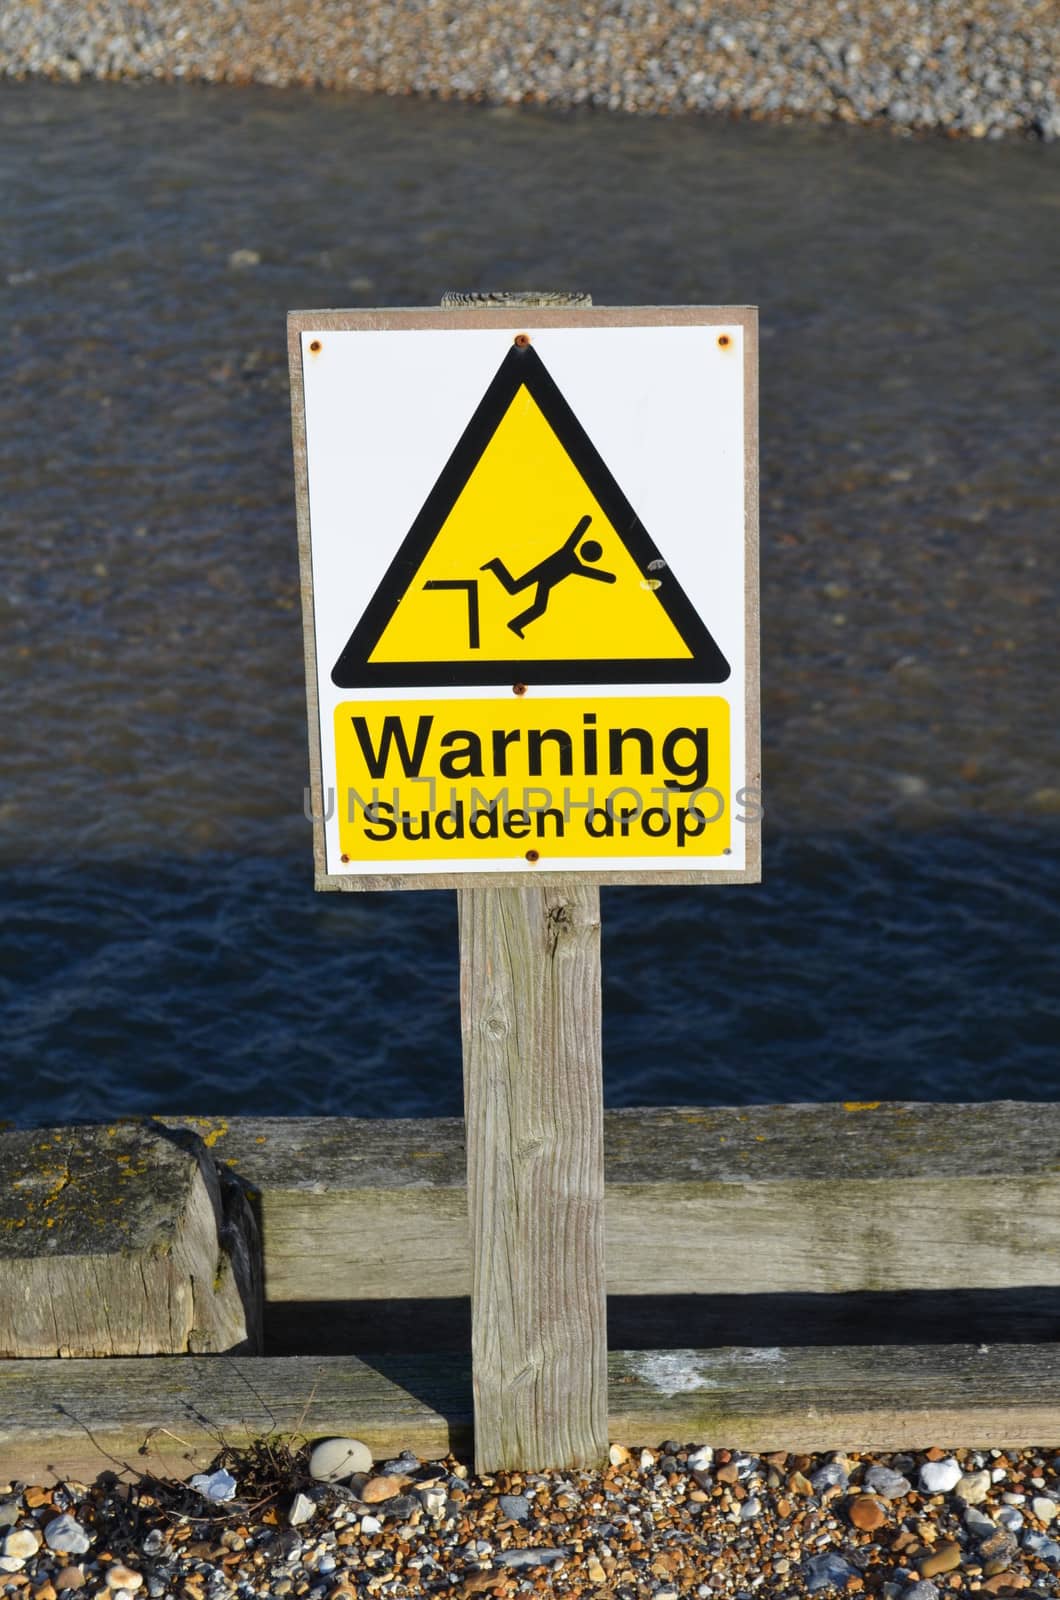 Warning sign informing of a sudden drop in terrain.